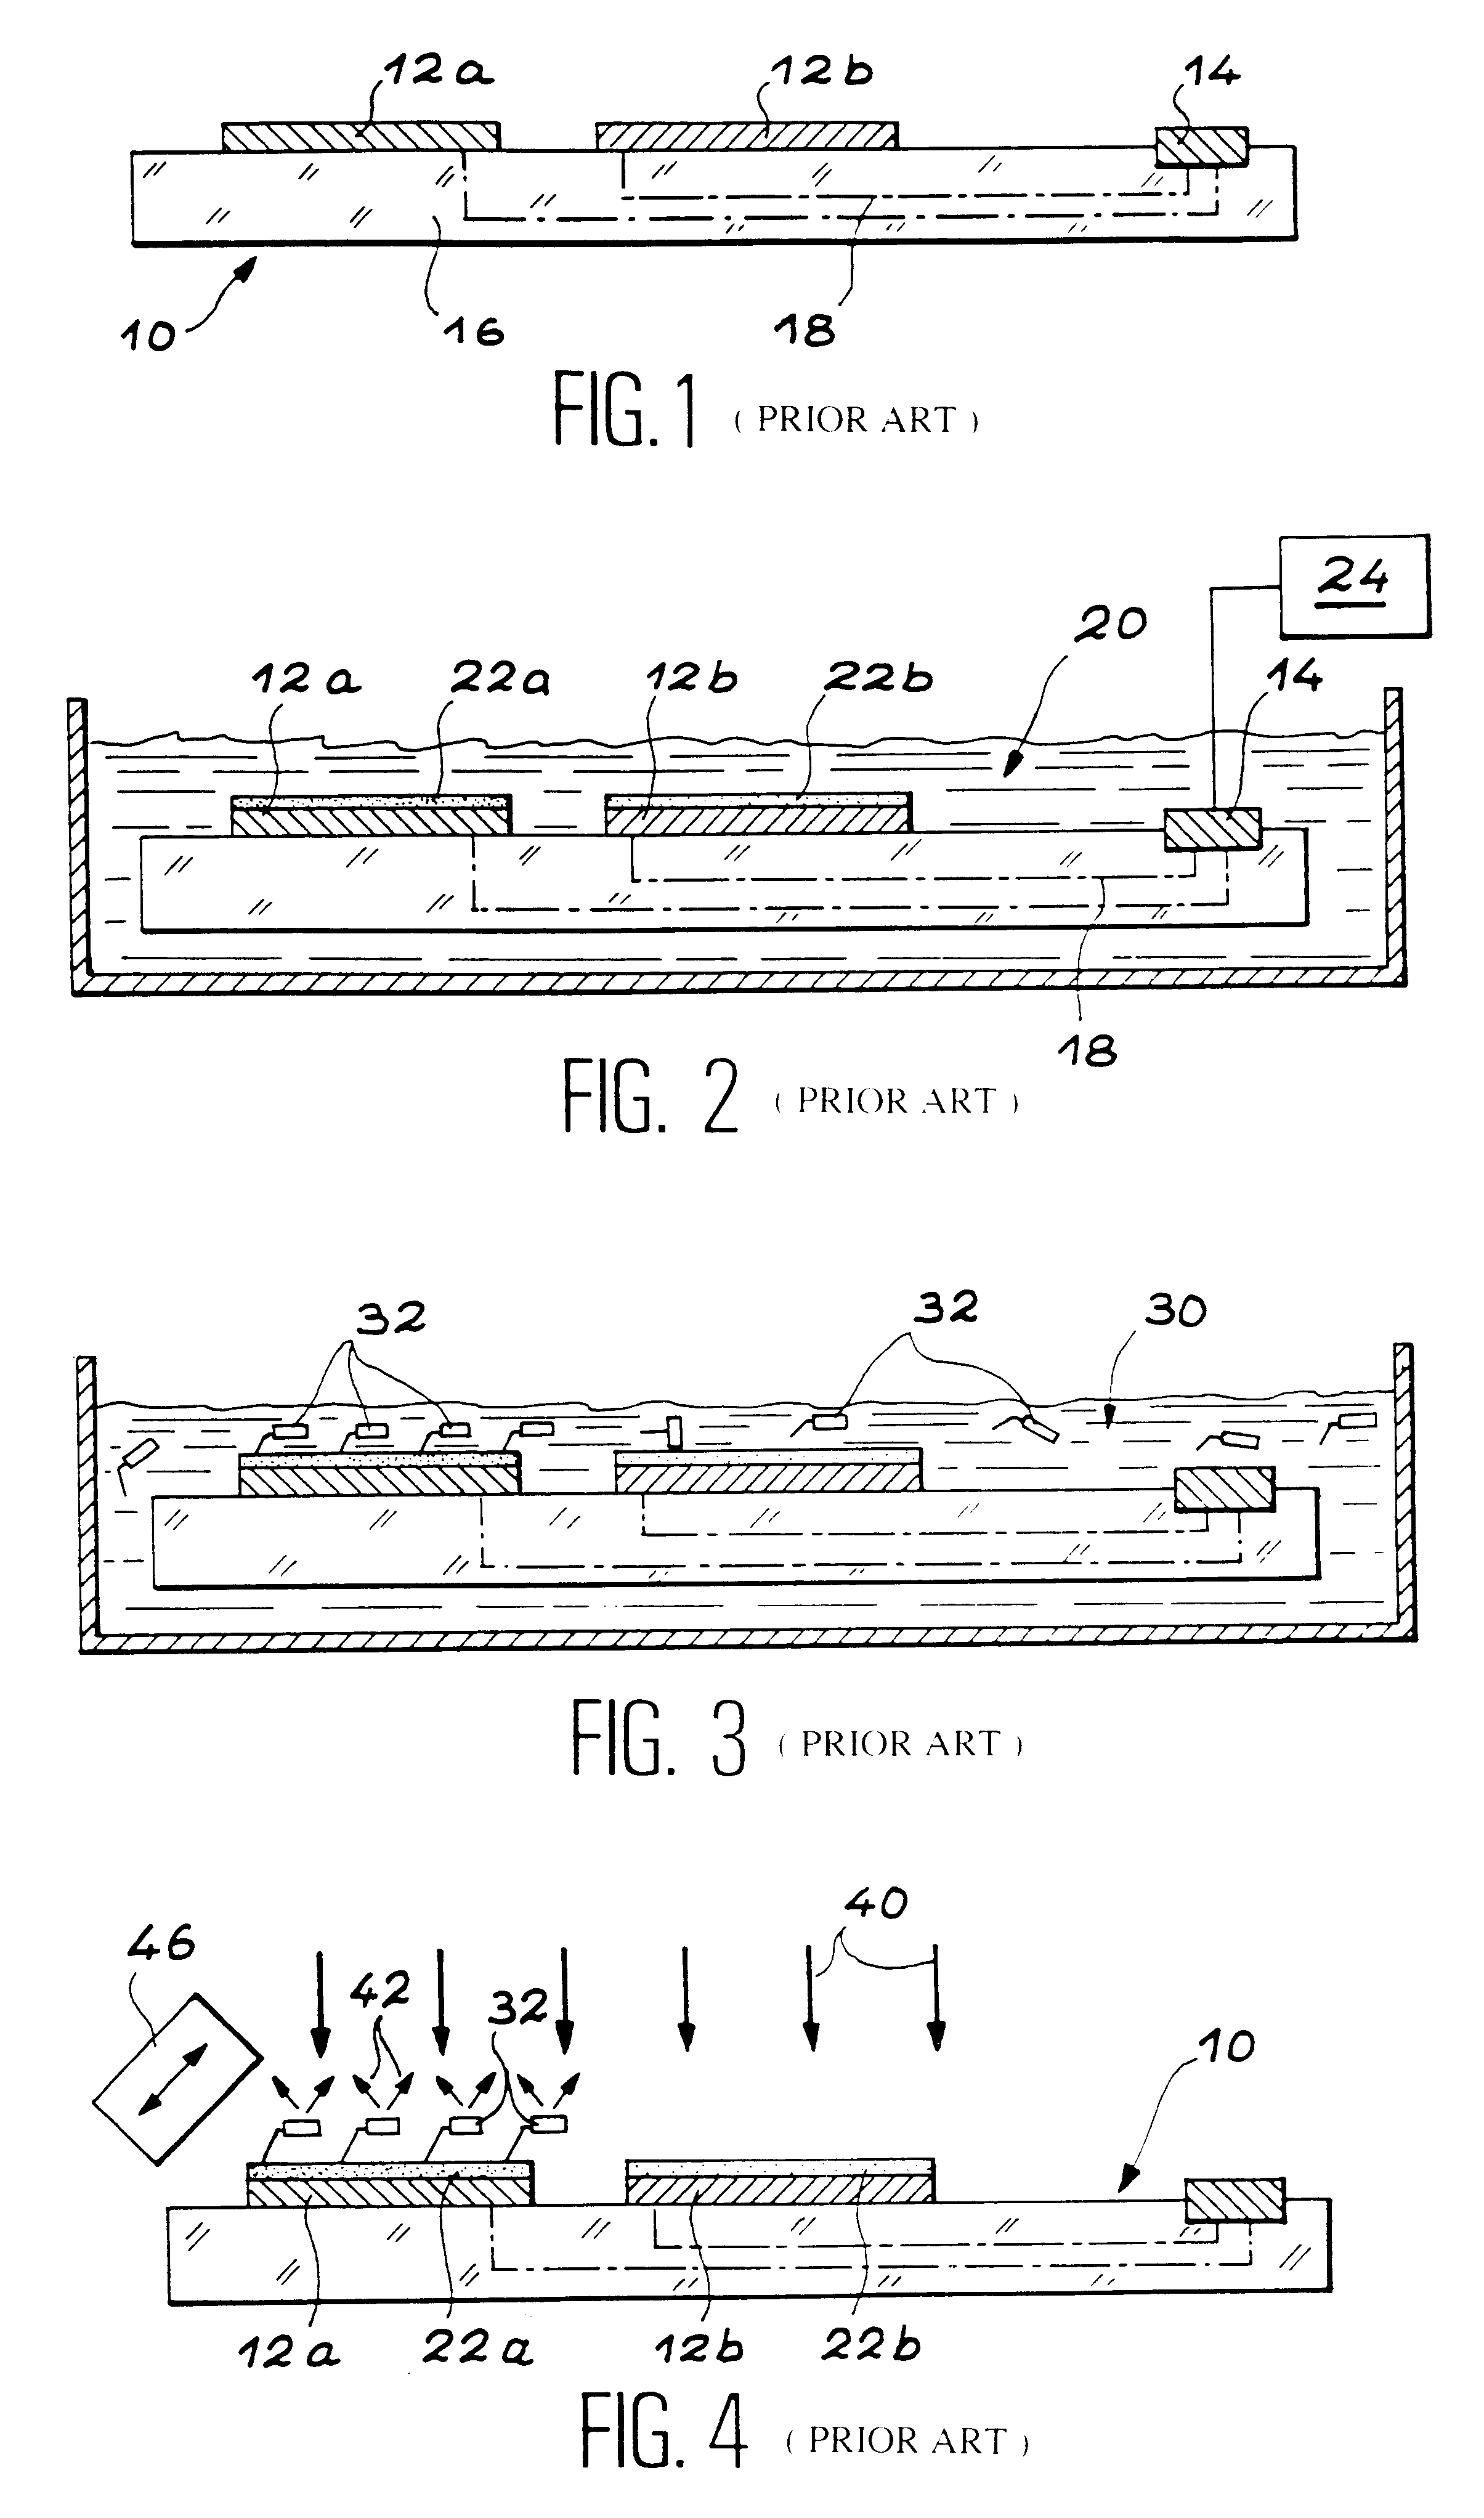 Chip-based analysis device comprising electrodes with localized heating